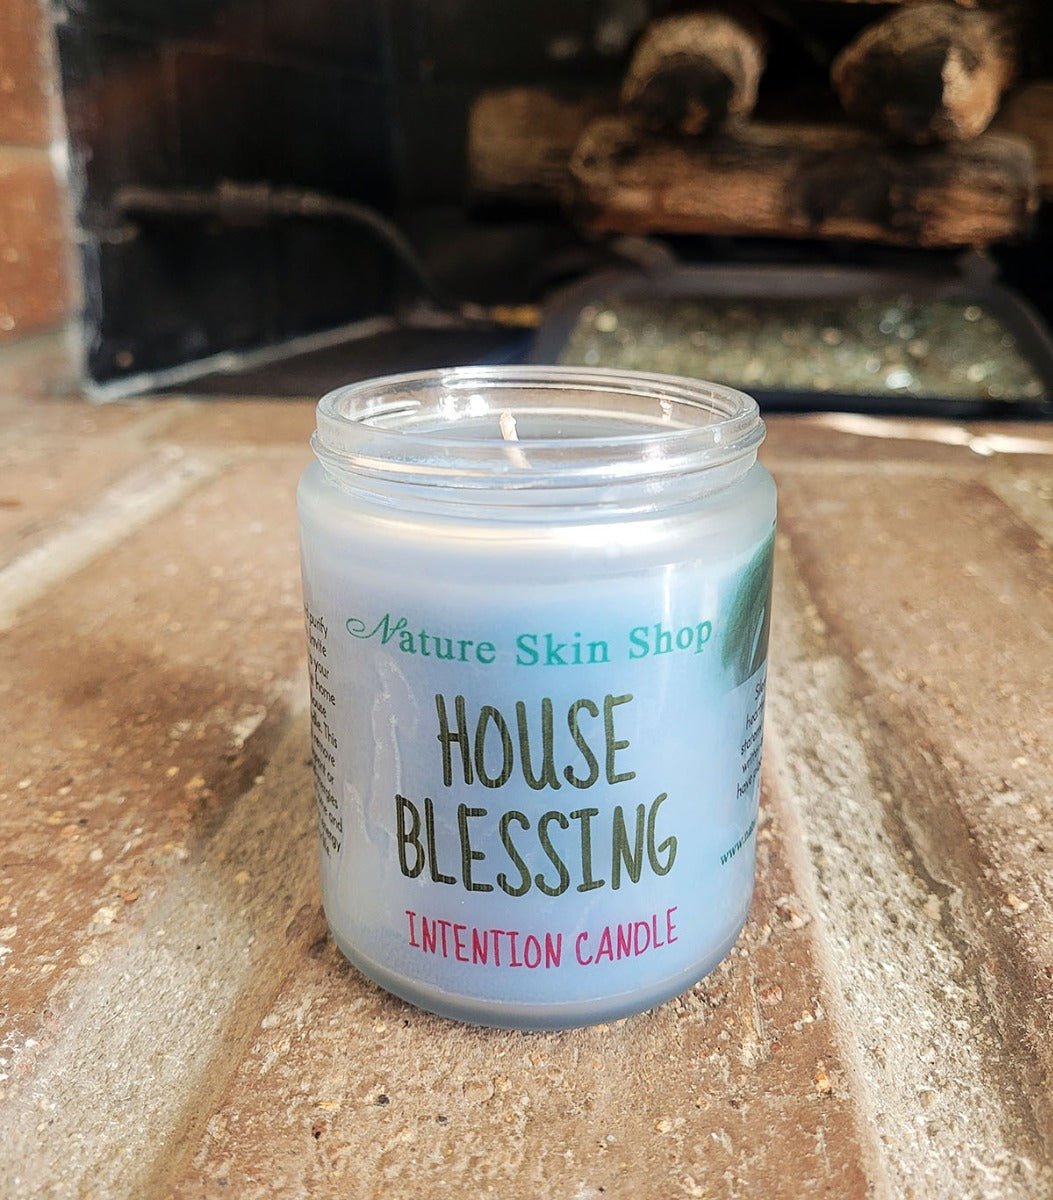 House Blessing Intention Artisan Soy Candle - Nature Skin Shop